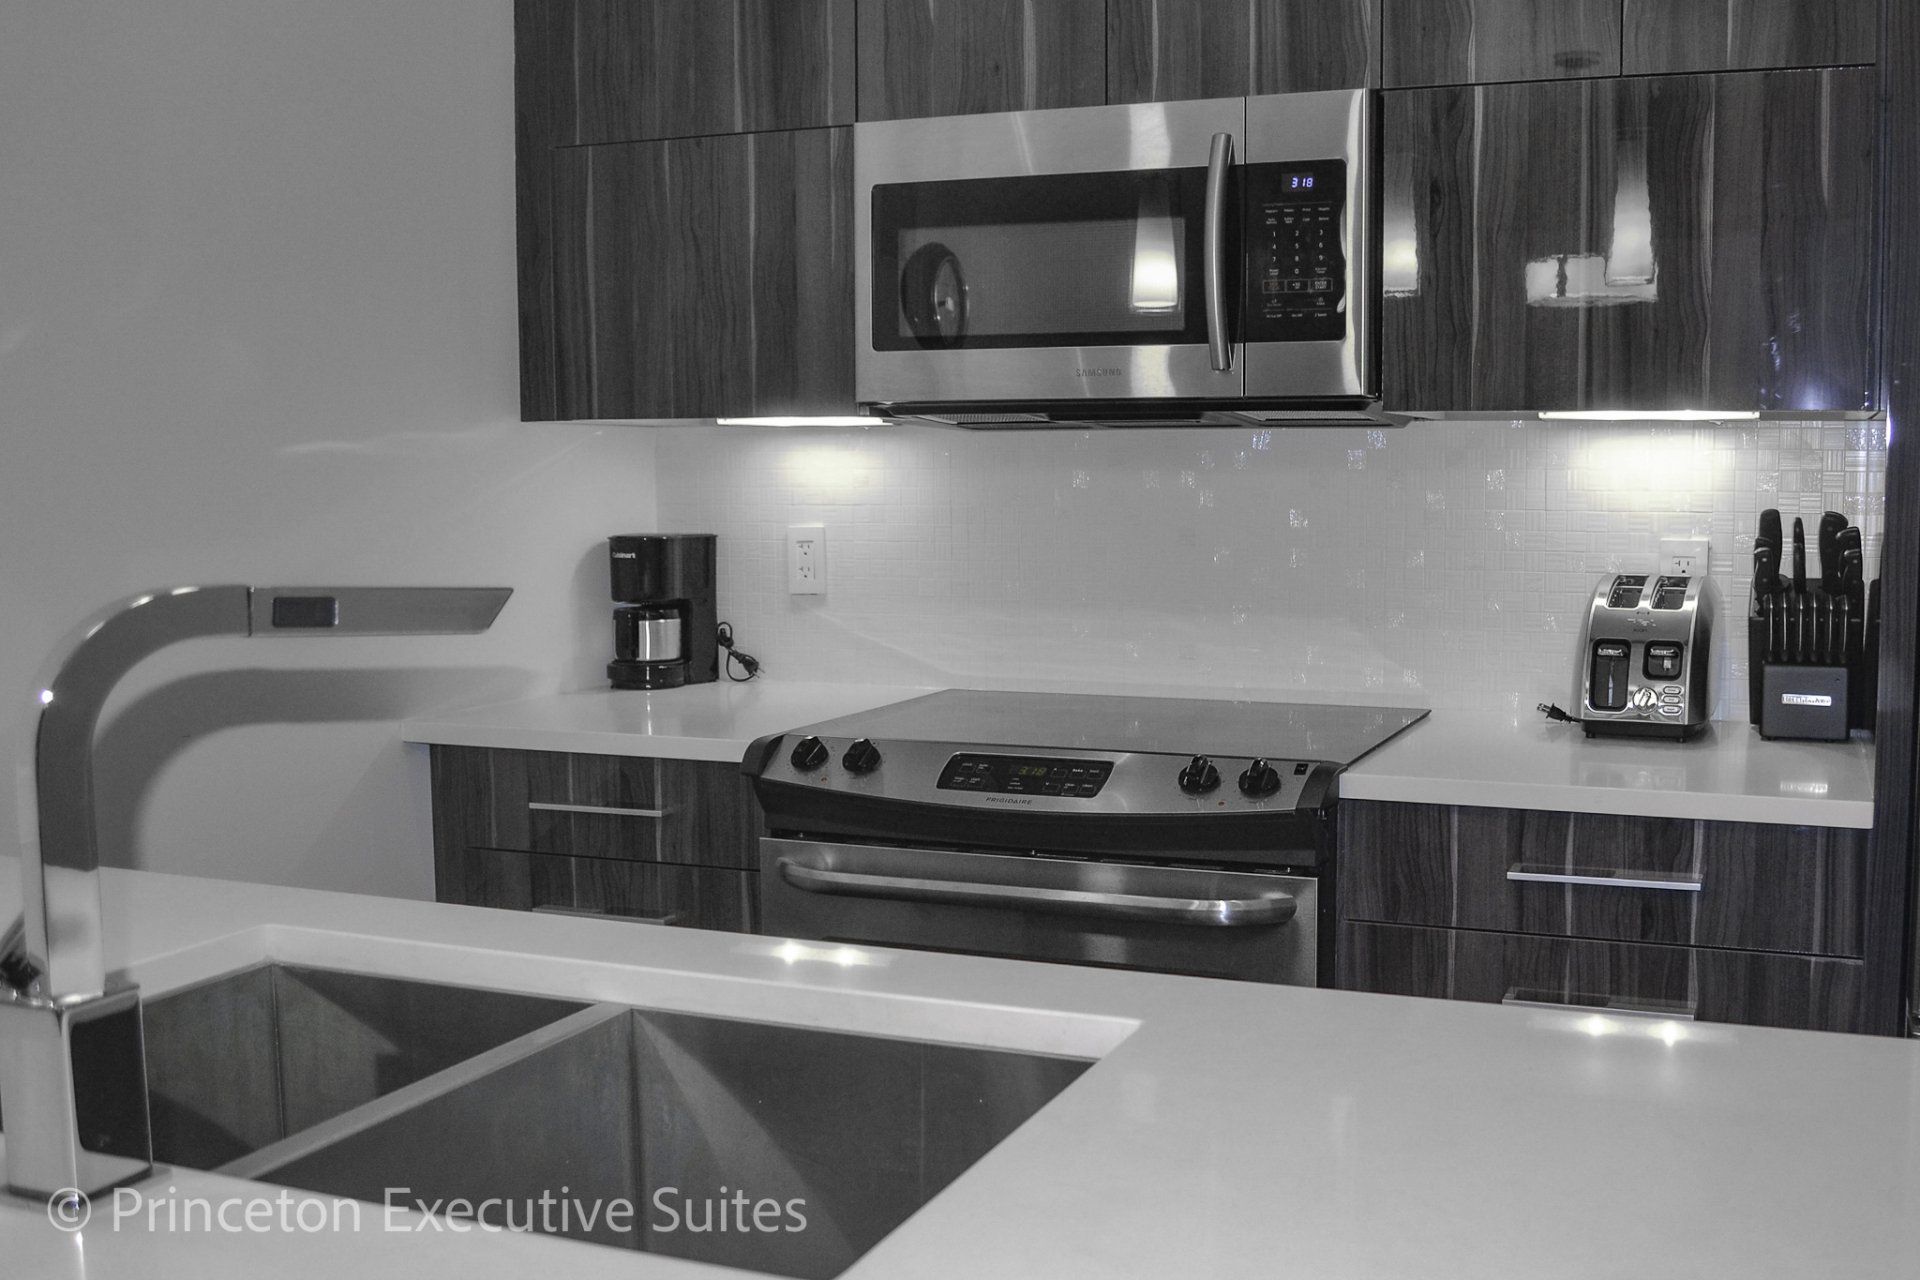 Stainless steel appliance with ceramic cooktop stove and white quarts countertop in this very modern edmonton executive suite